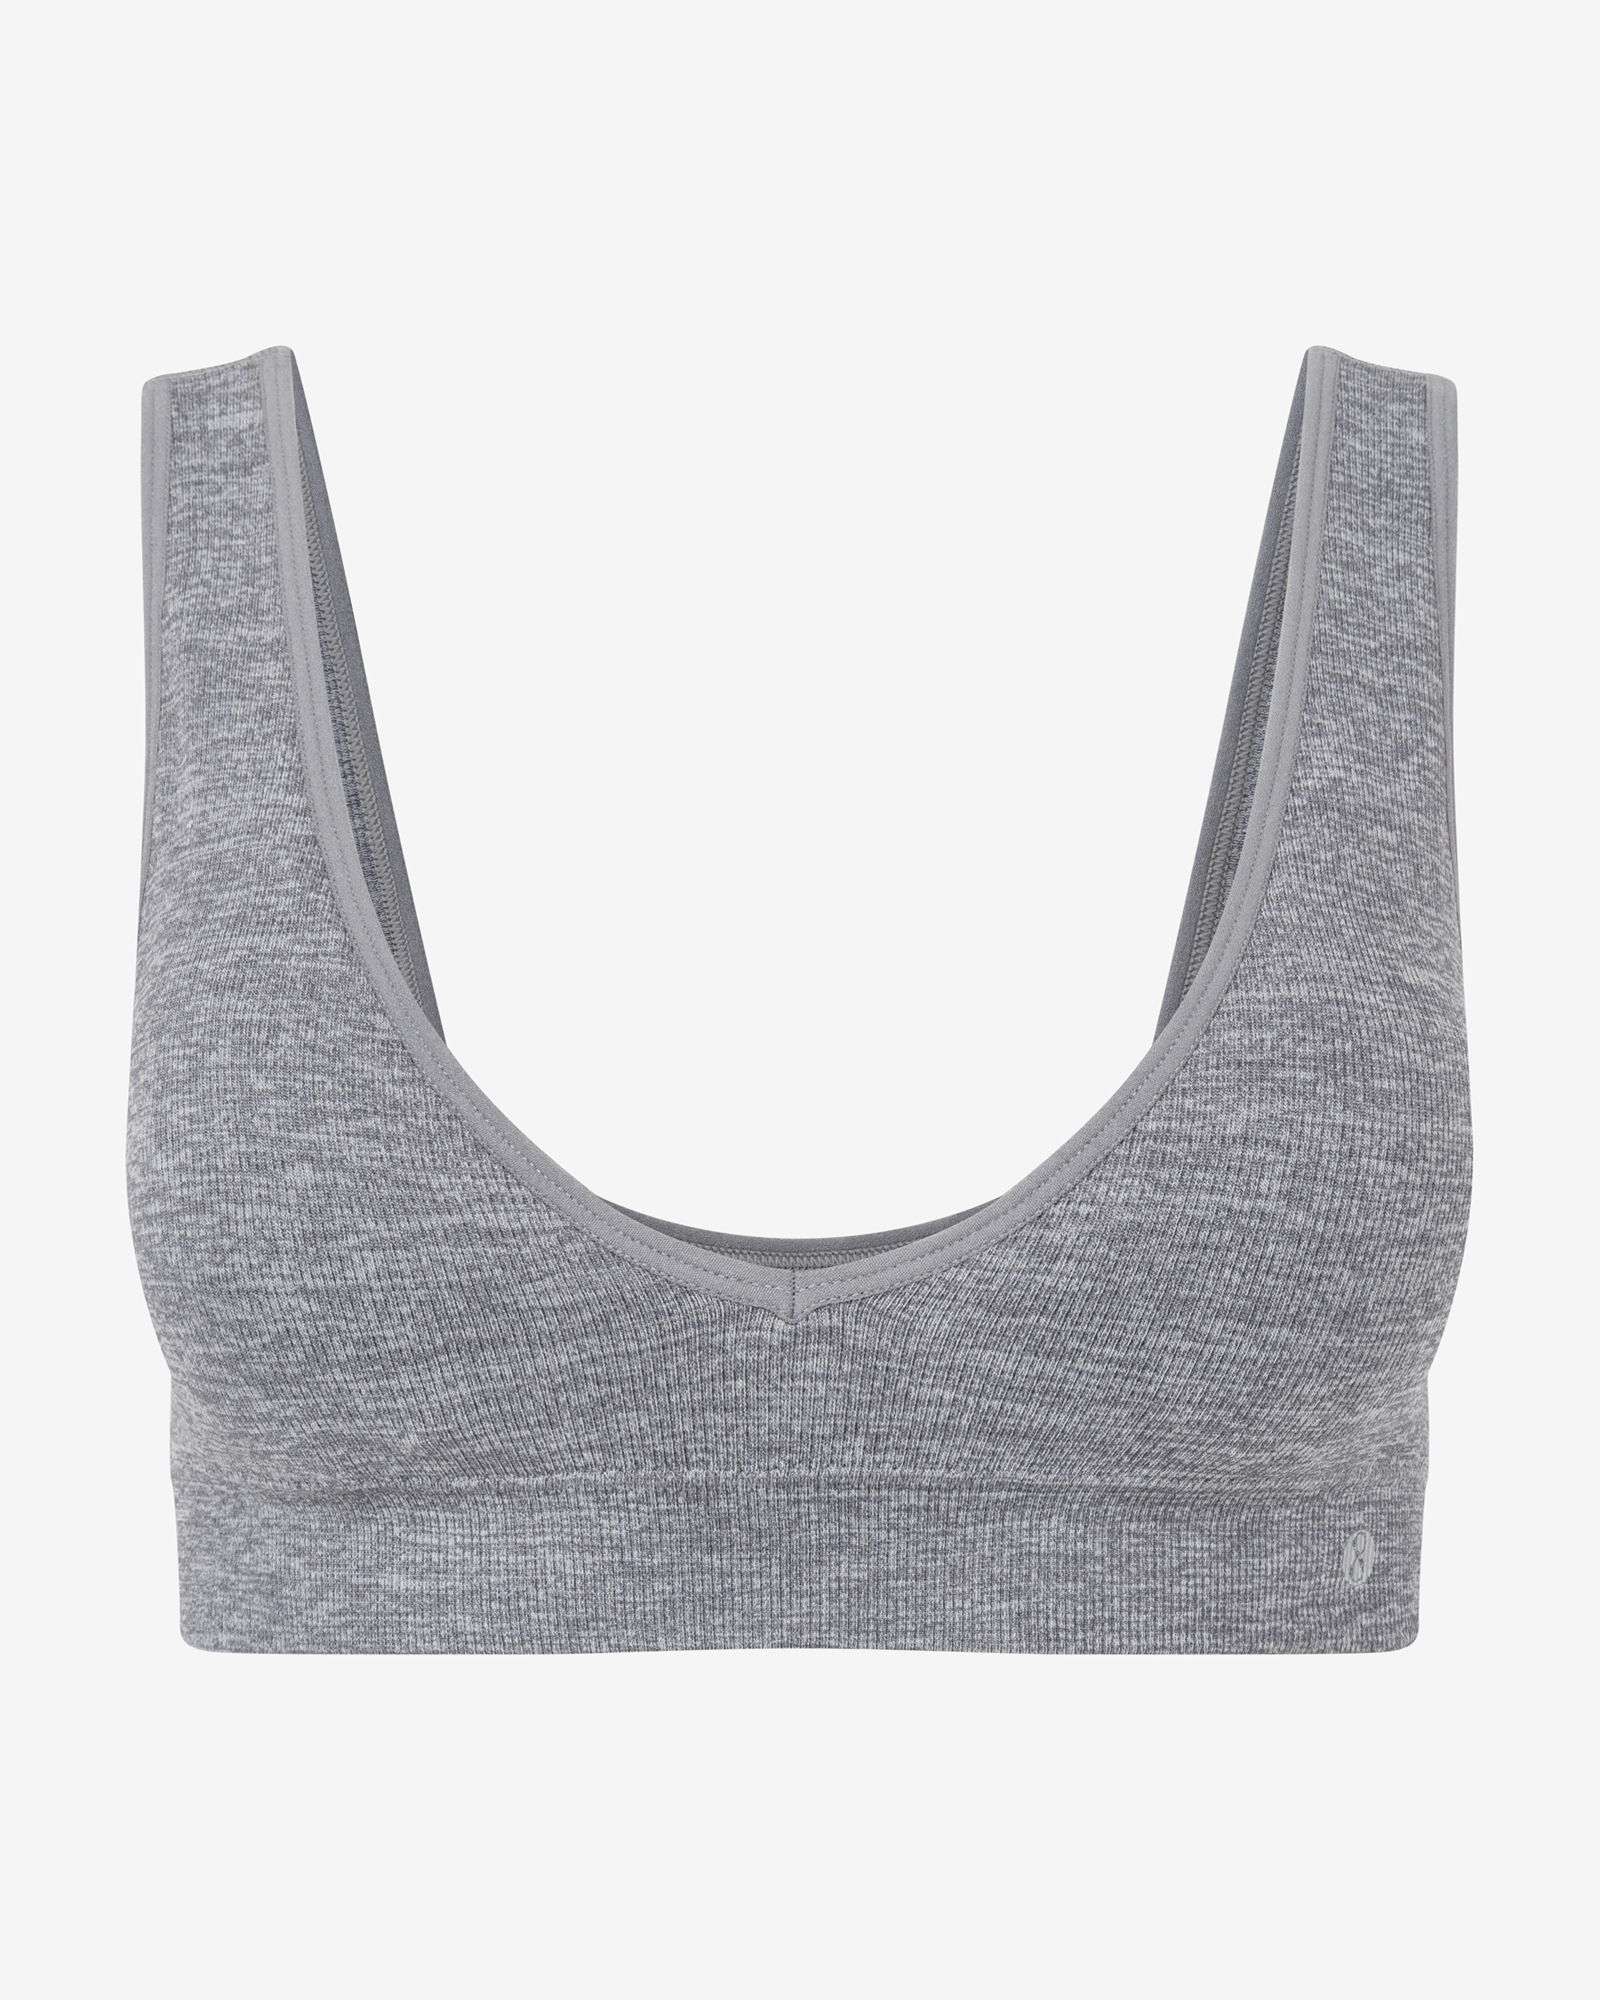 LAYER 8 MAXIMUM SUPPORT SIZE 3XL Sports Bra HEATHER GRAY Fitted Front  Zipper-NEW